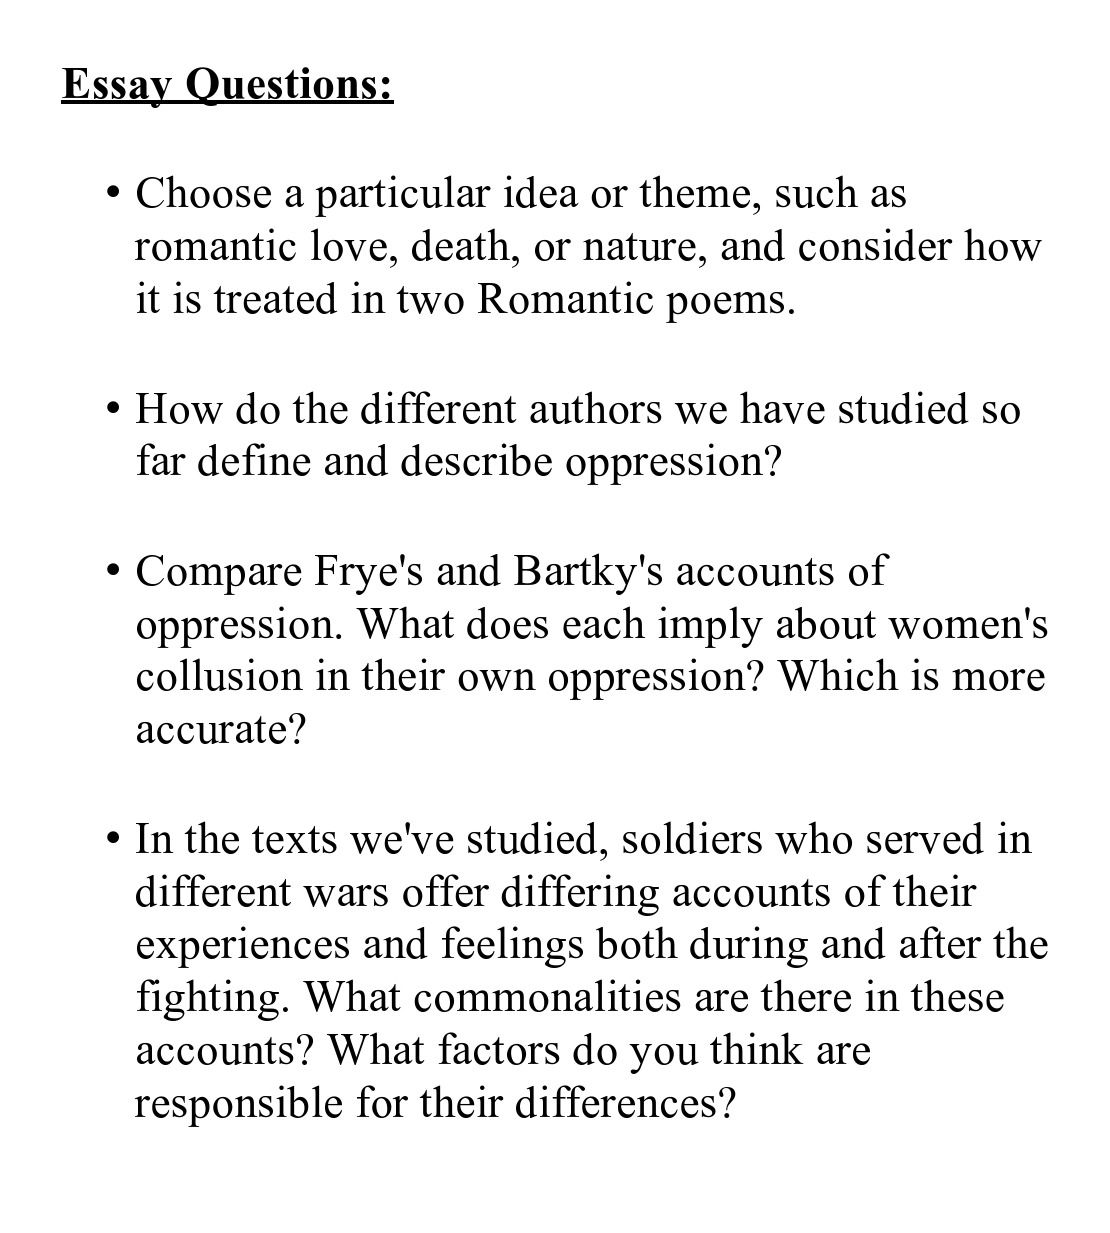 how to write an essay with 3 questions